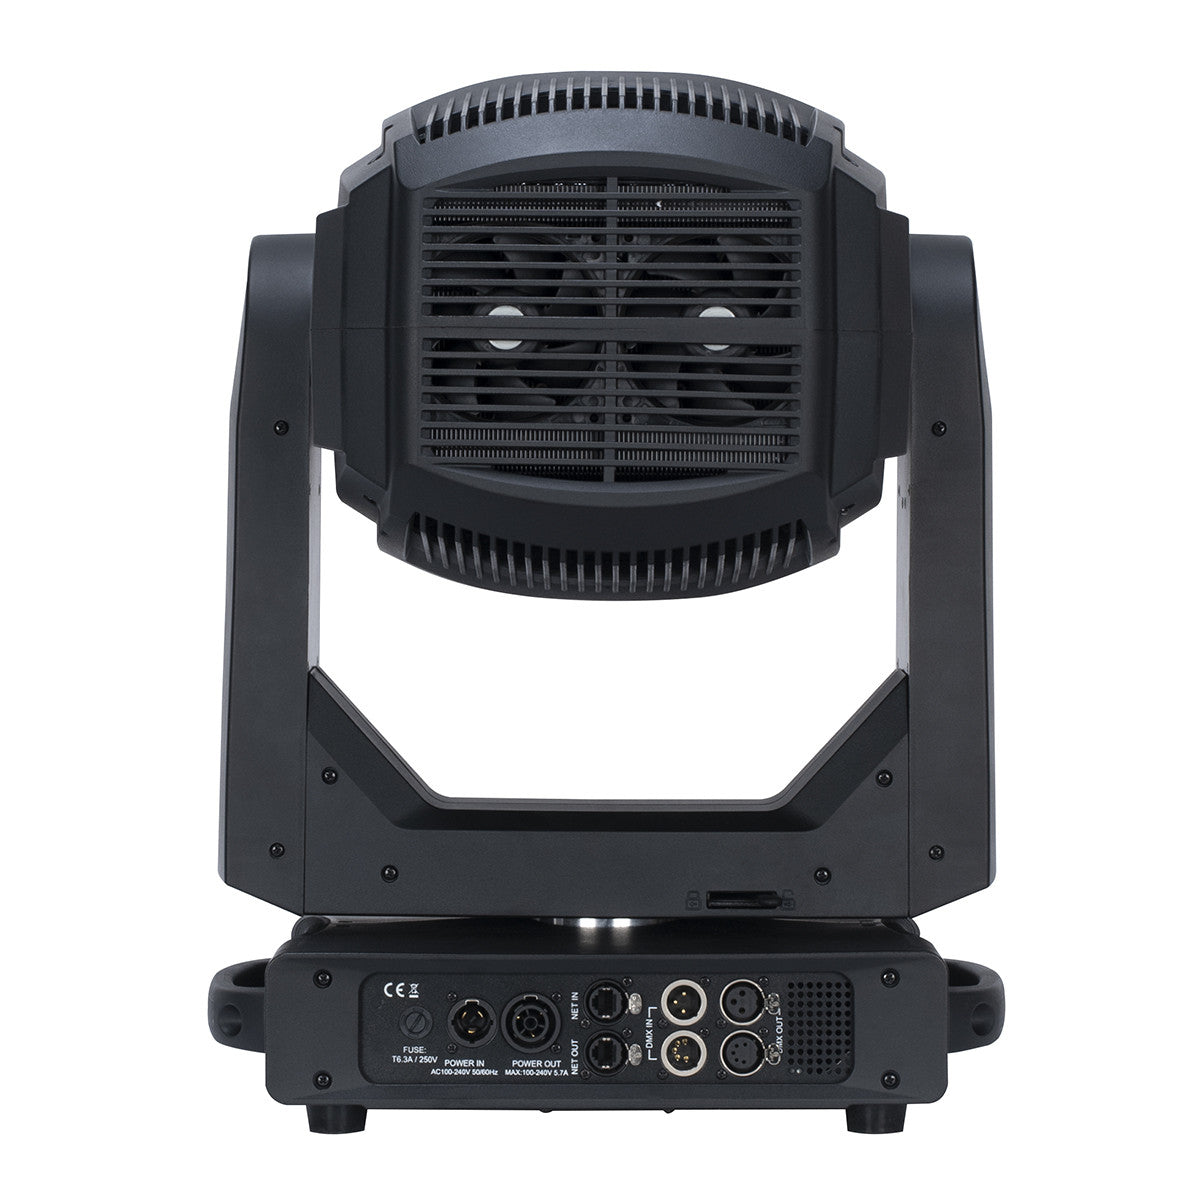 ADJ Focus Profile 400W LED Moving Head Profile Fixture with Framing Shutters